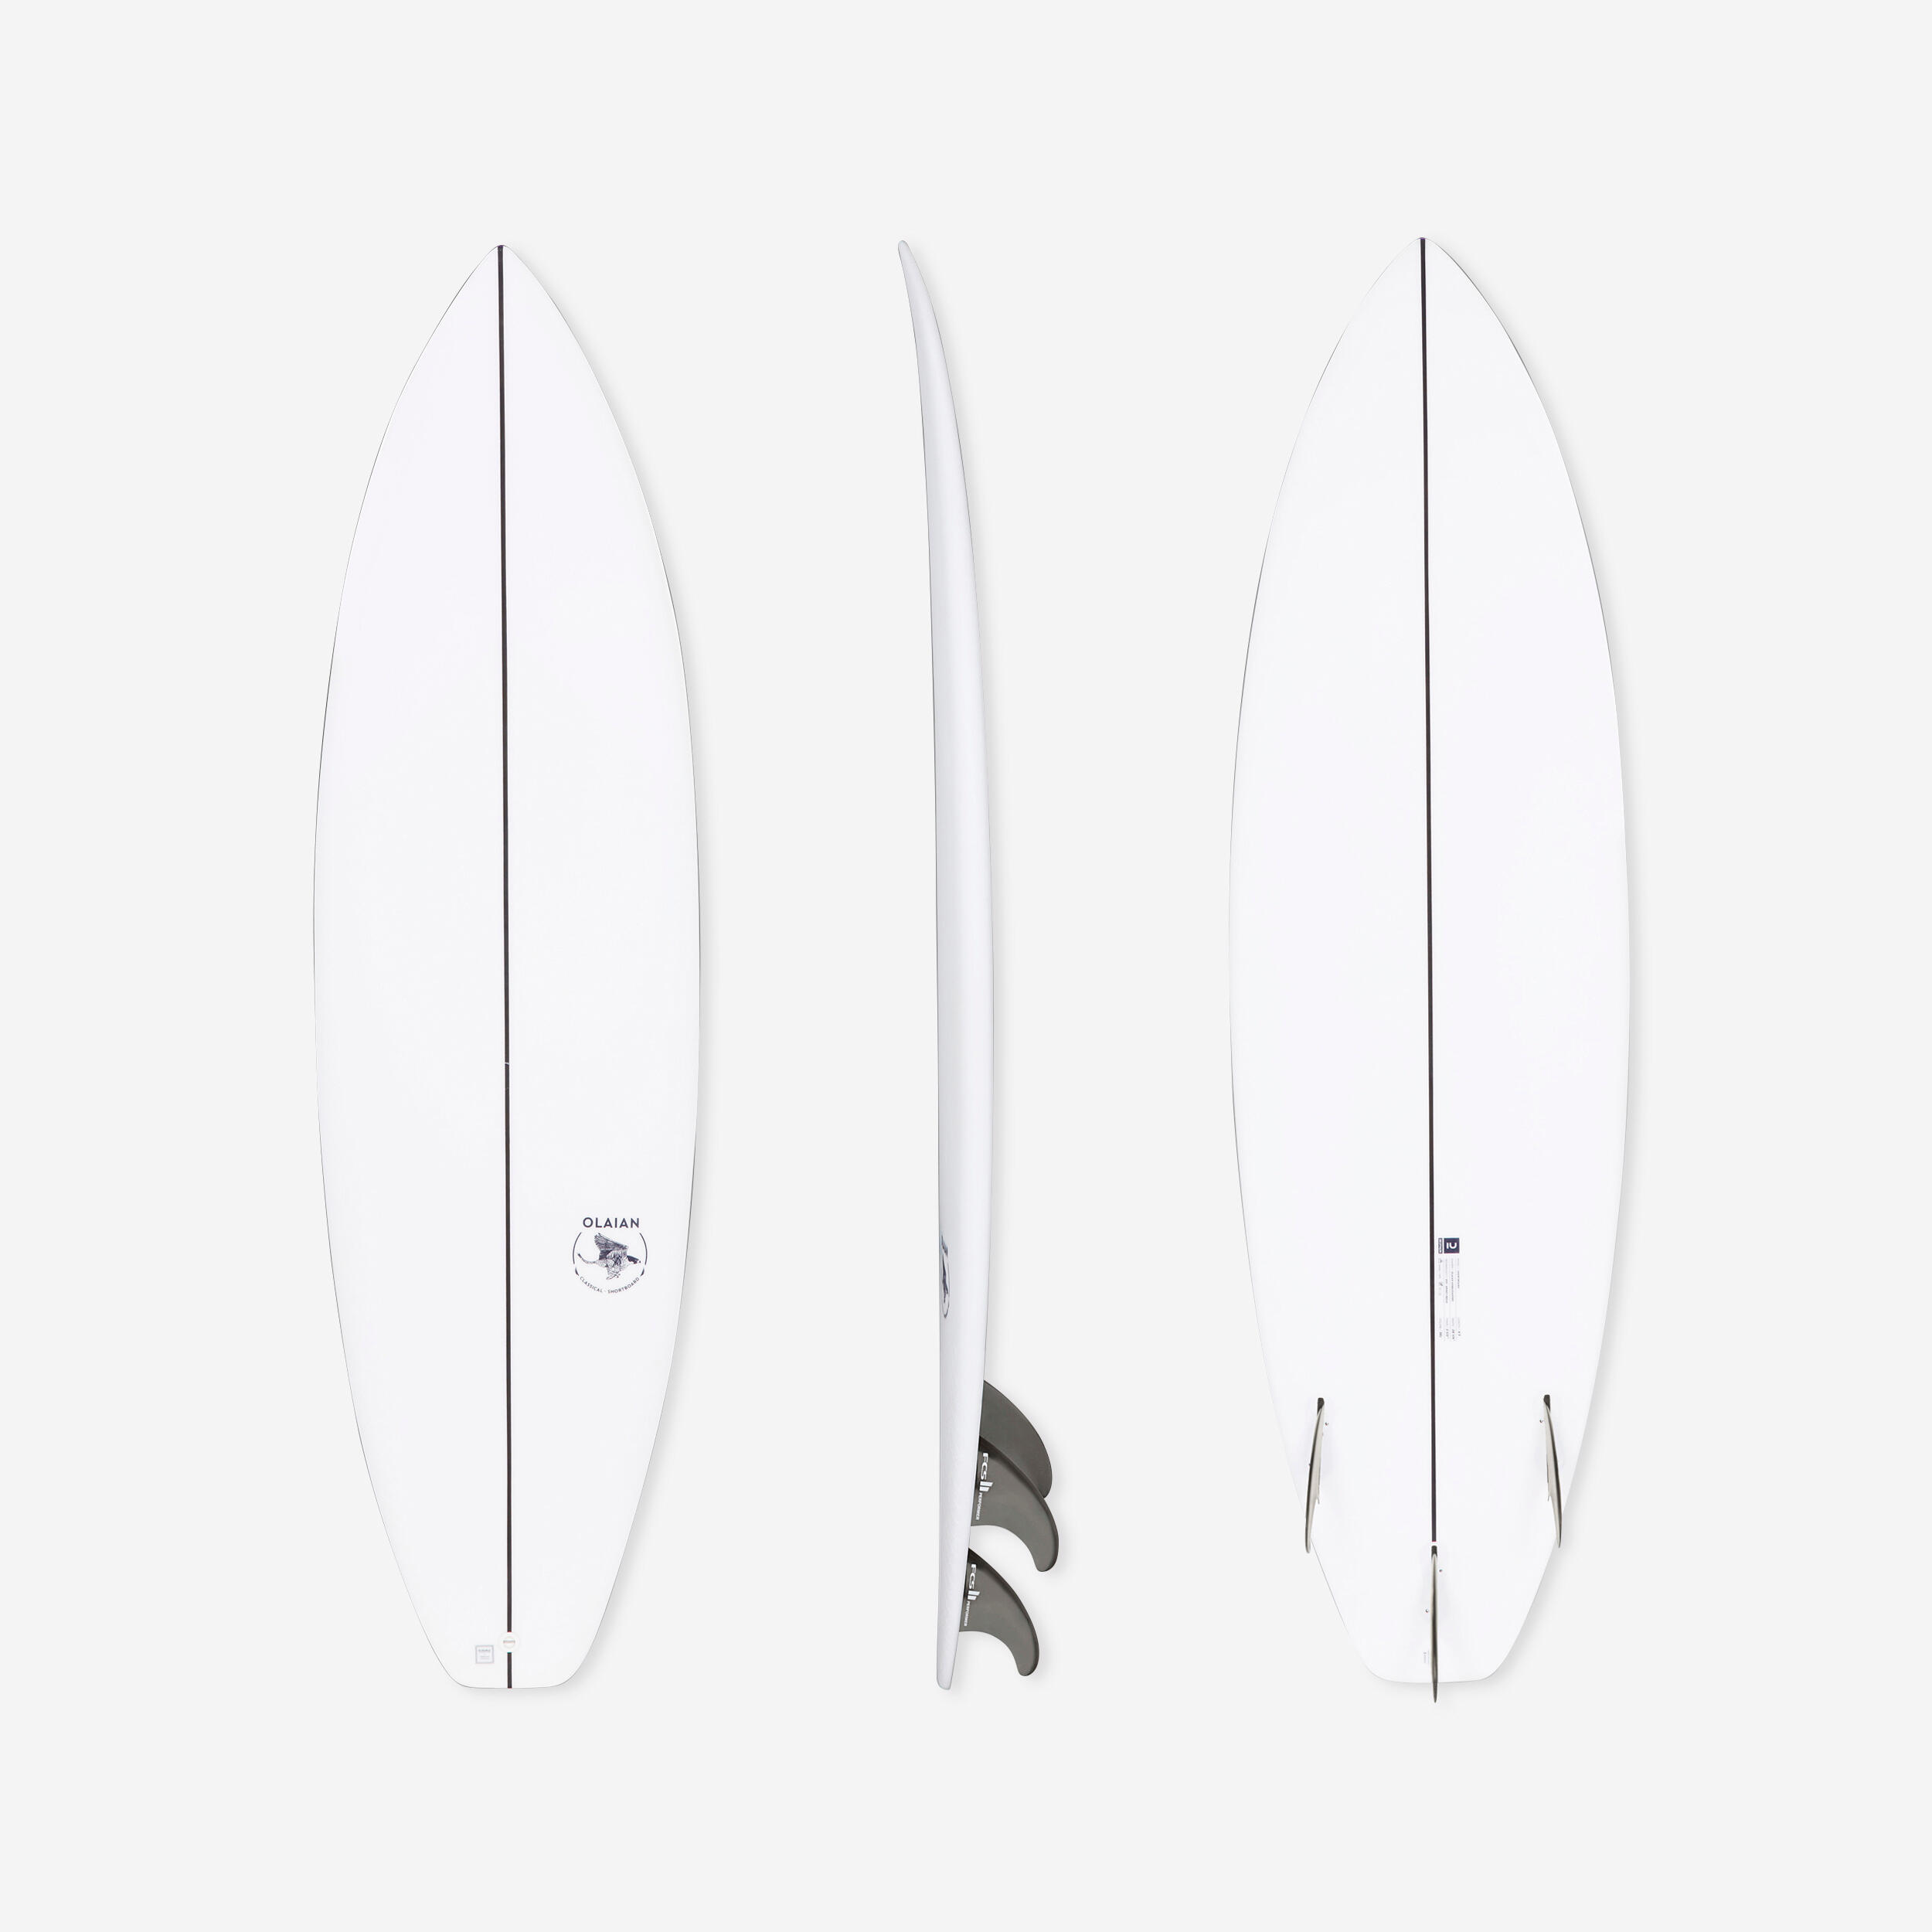 SHORTBOARD 900 6'3" 35 L. Supplied with 3 FCS2 fins 1/13